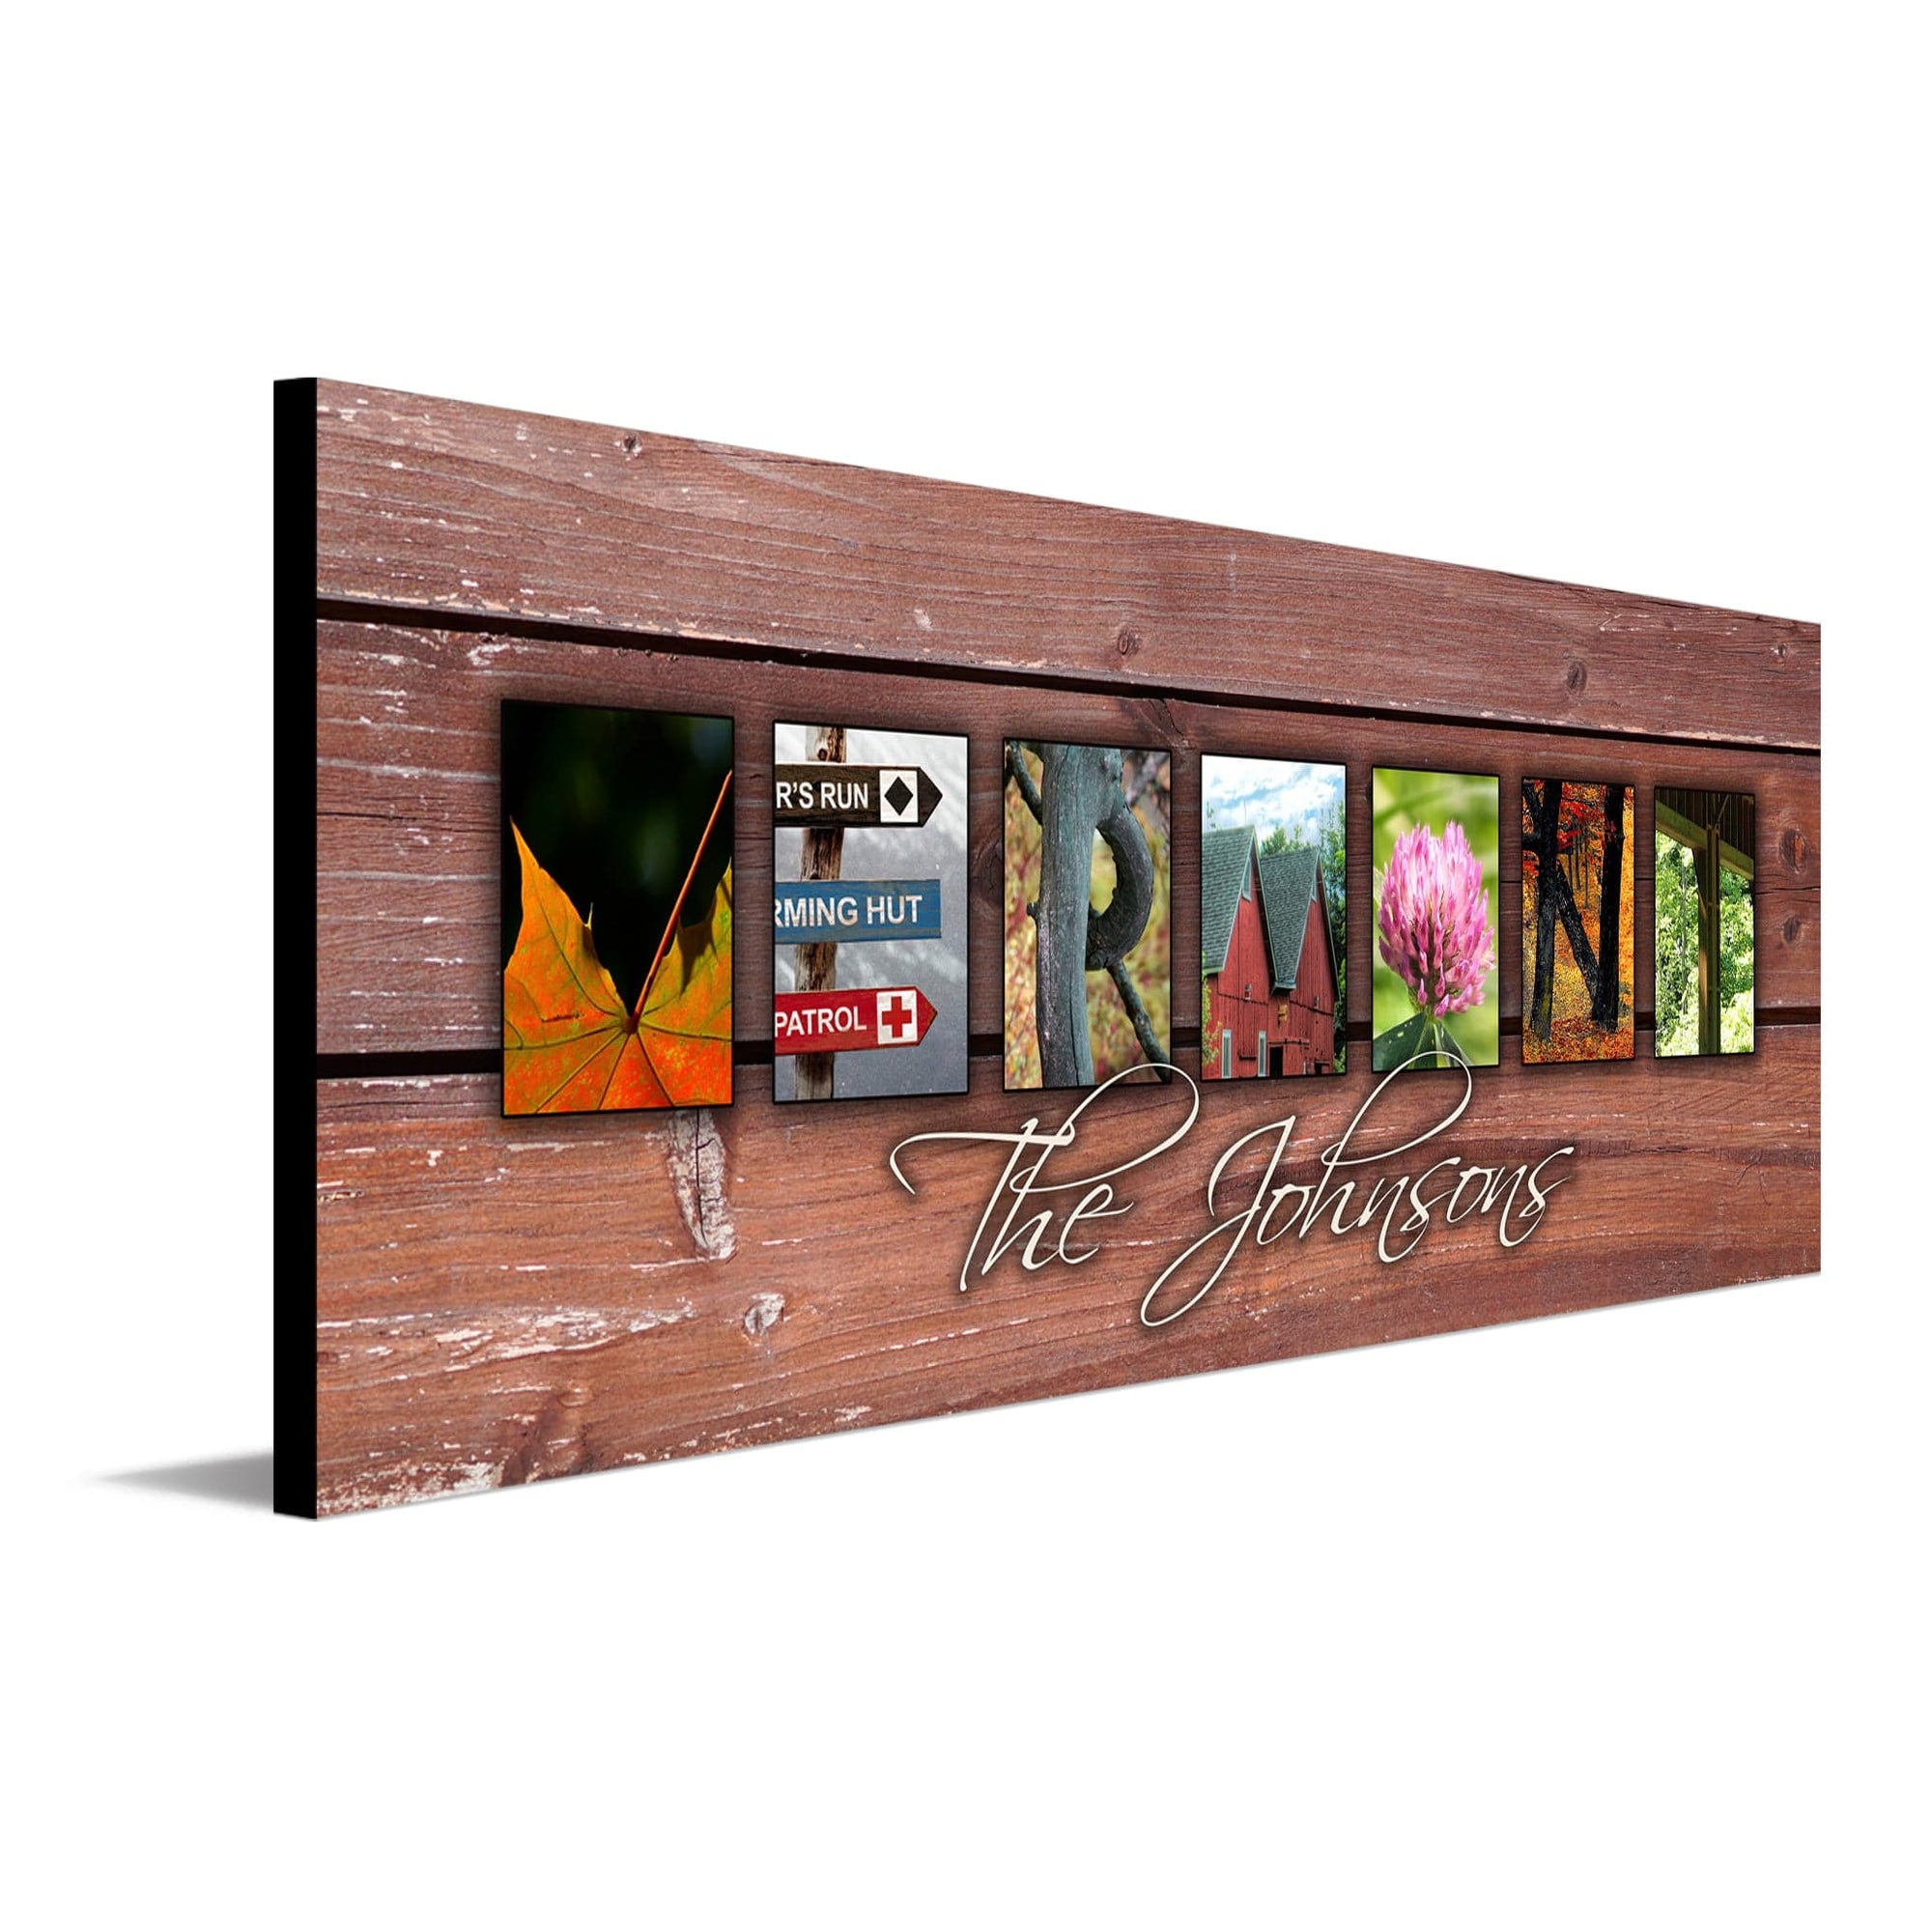 Personalized Vermont wall art using images of the state to spell the word Vermont - Personal-Prints